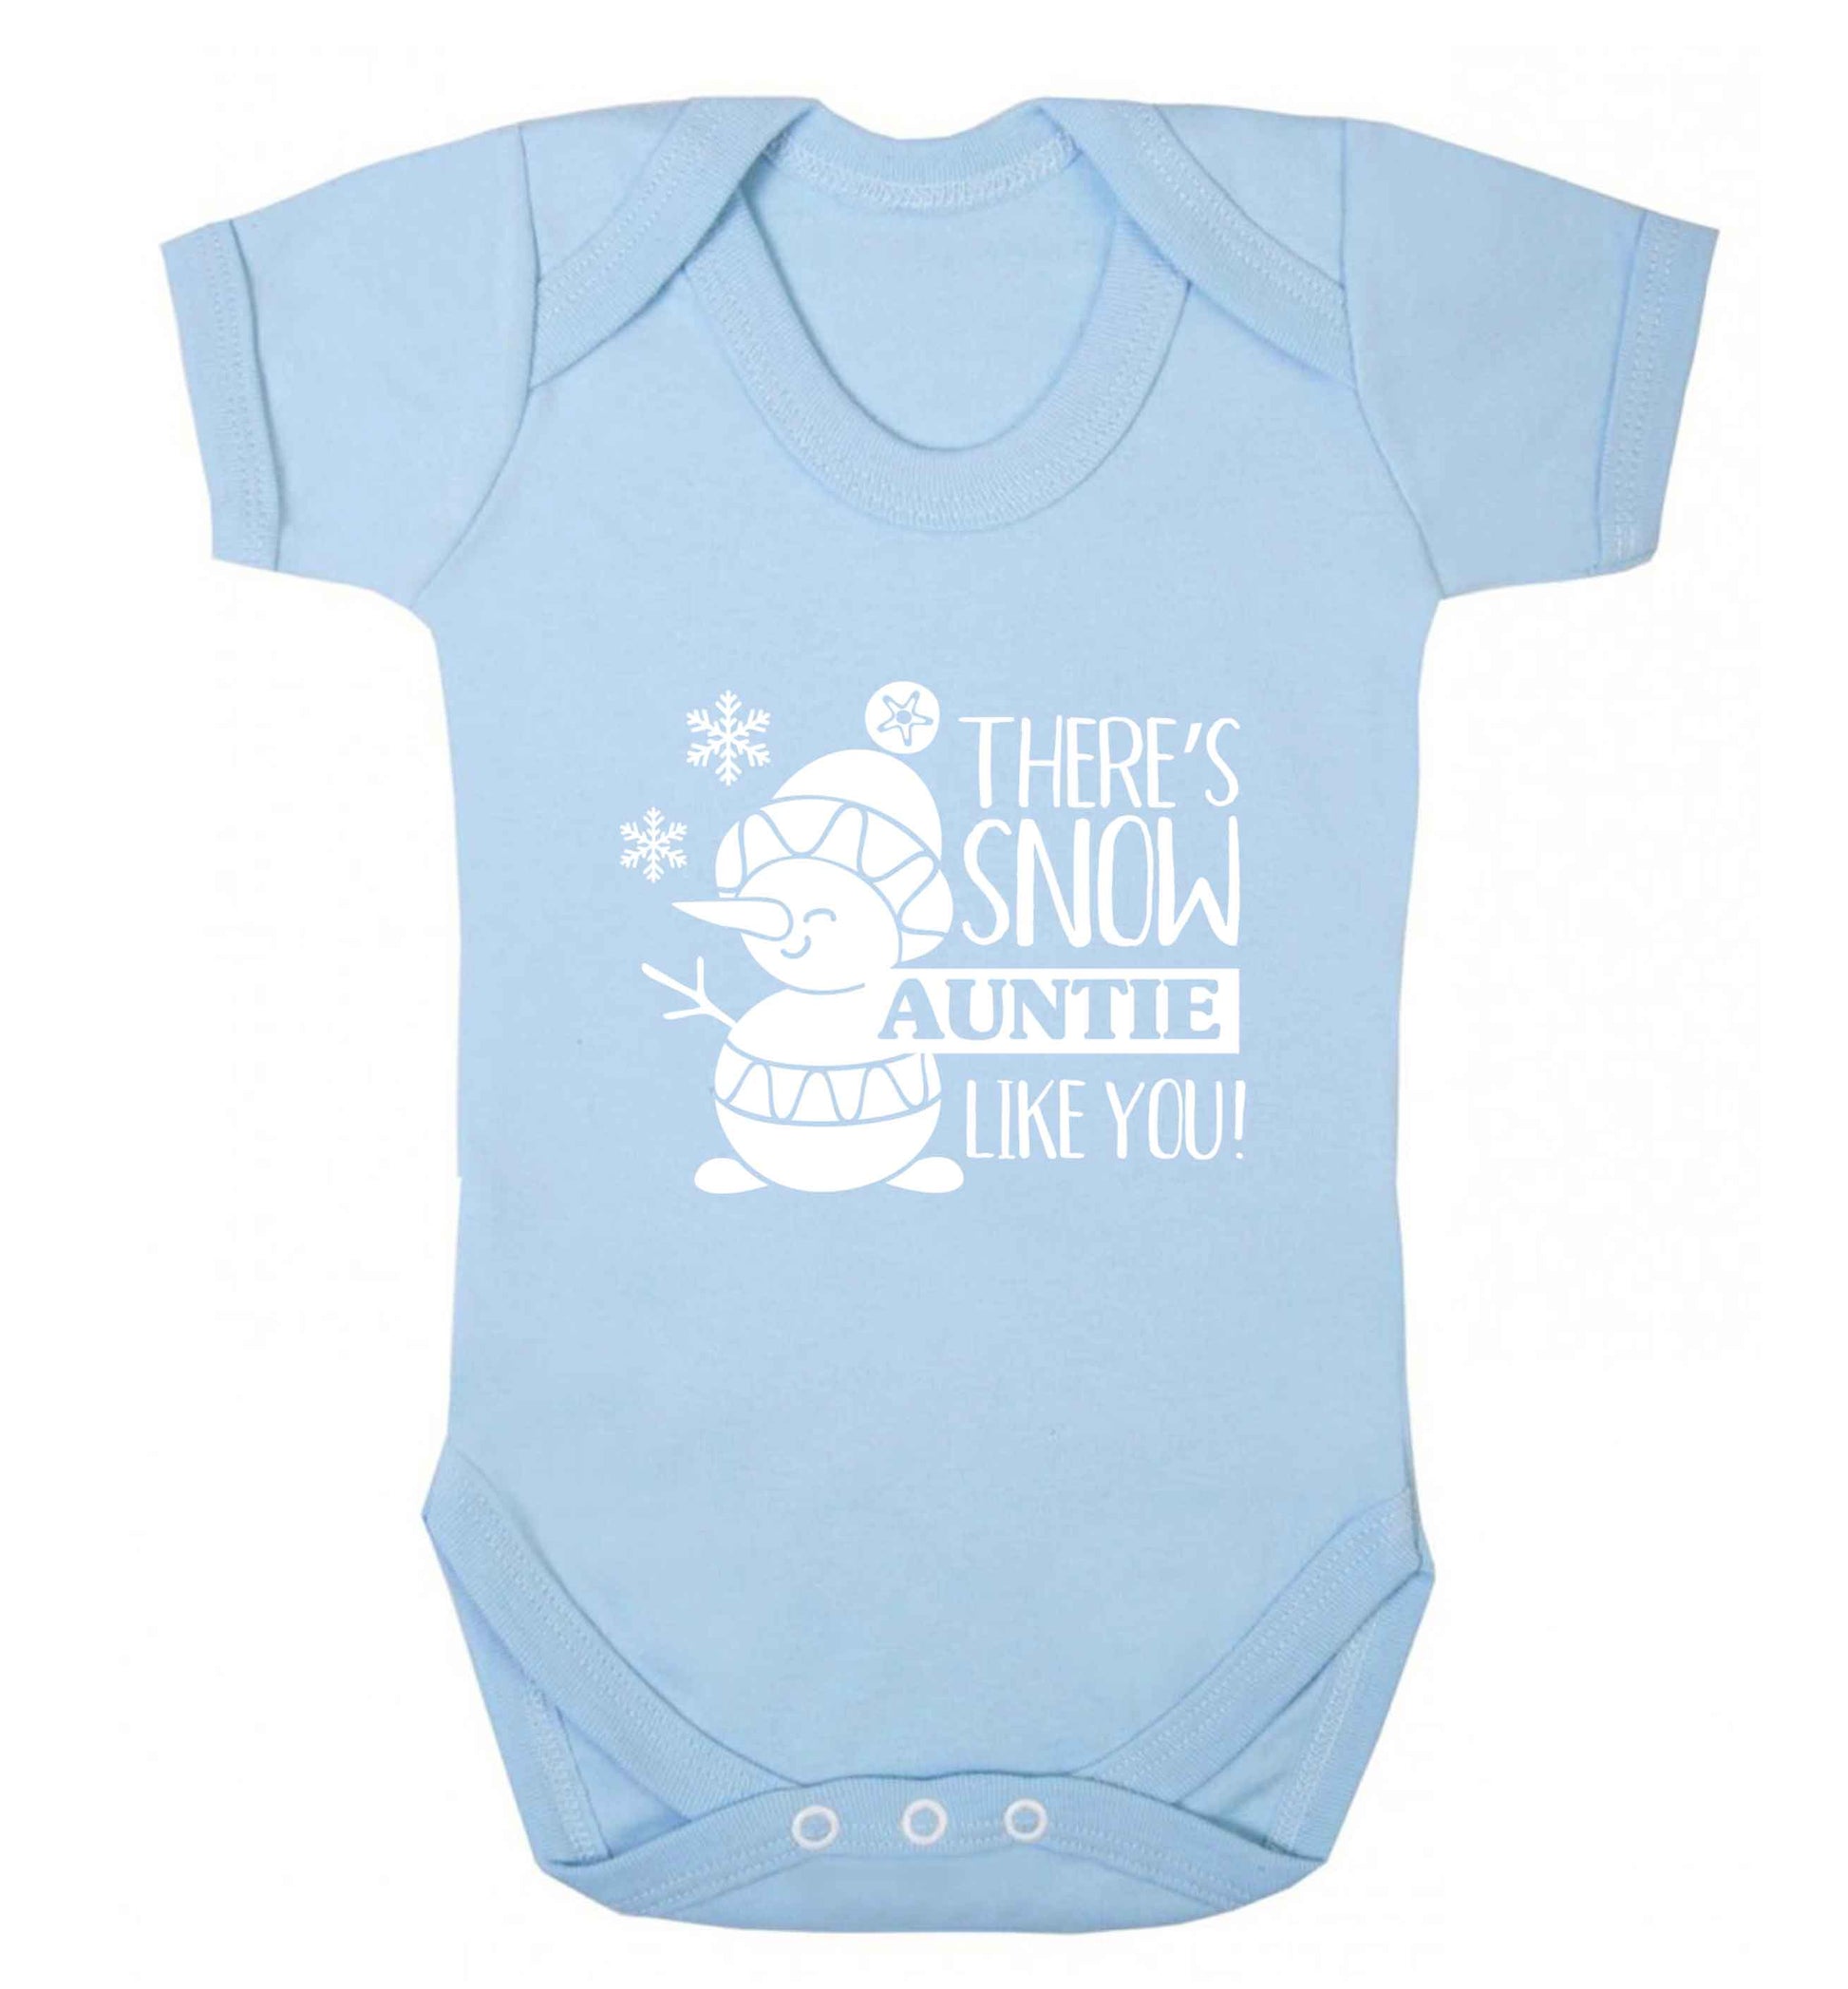 There's snow auntie like you baby vest pale blue 18-24 months